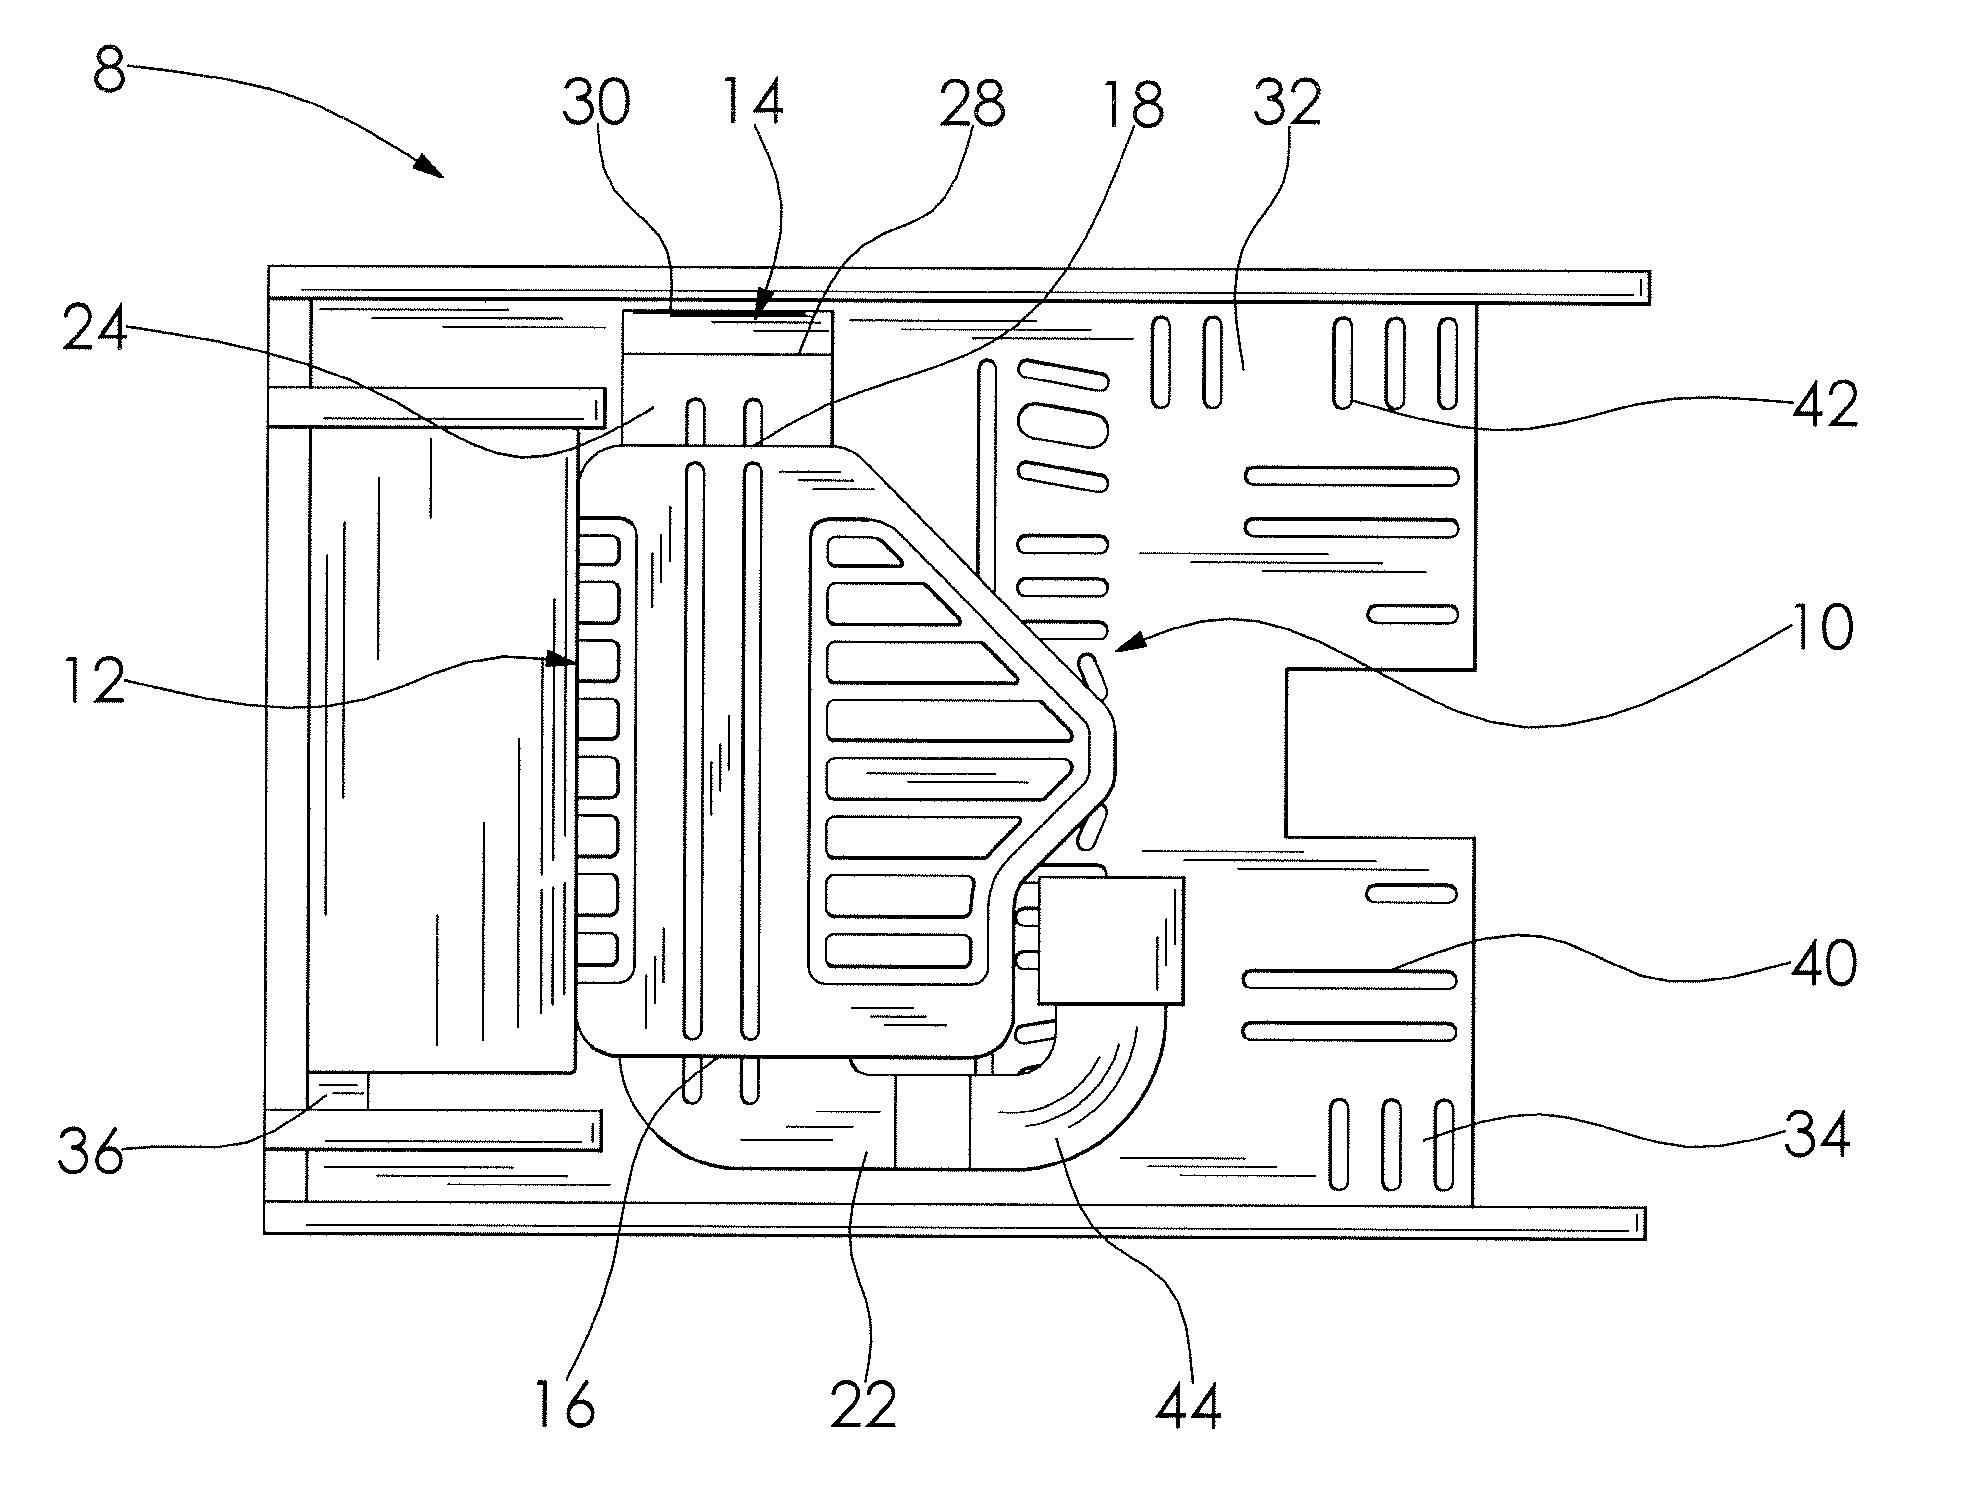 High voltage battery with a pulling ventilator in a fuel cell vehicle